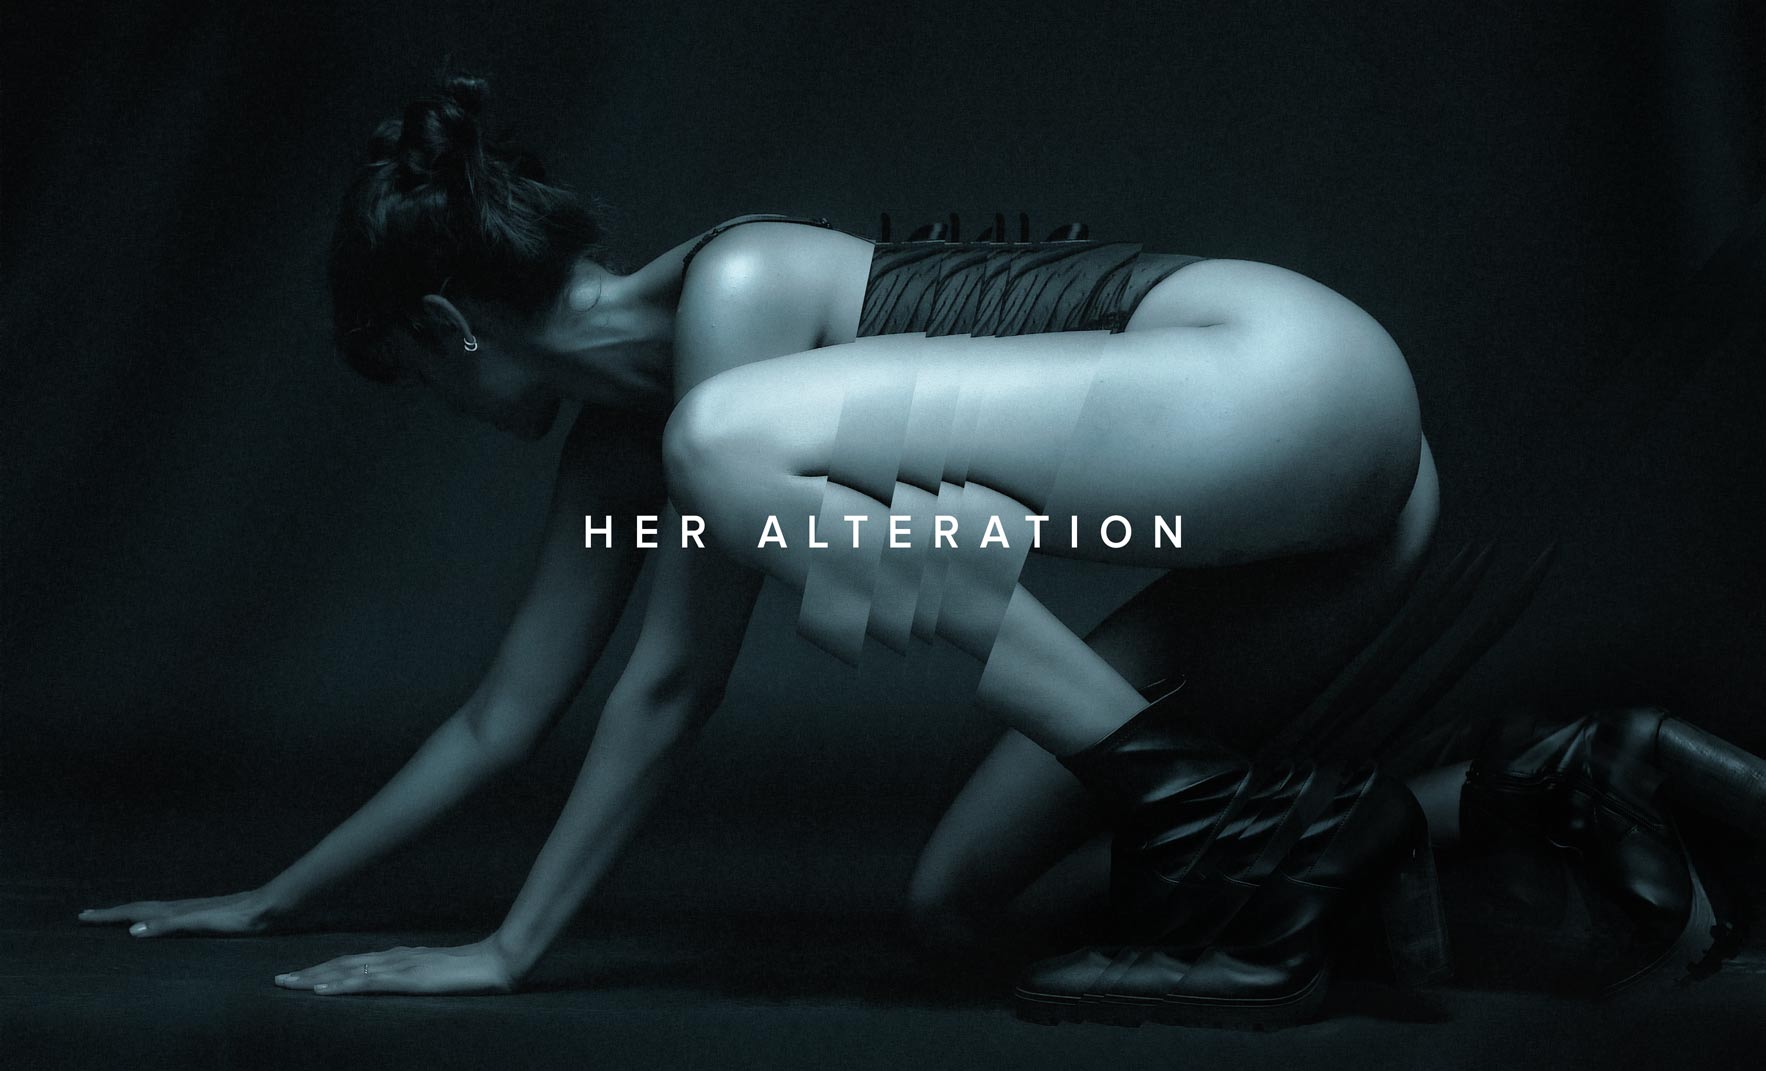 HER ALTERATION